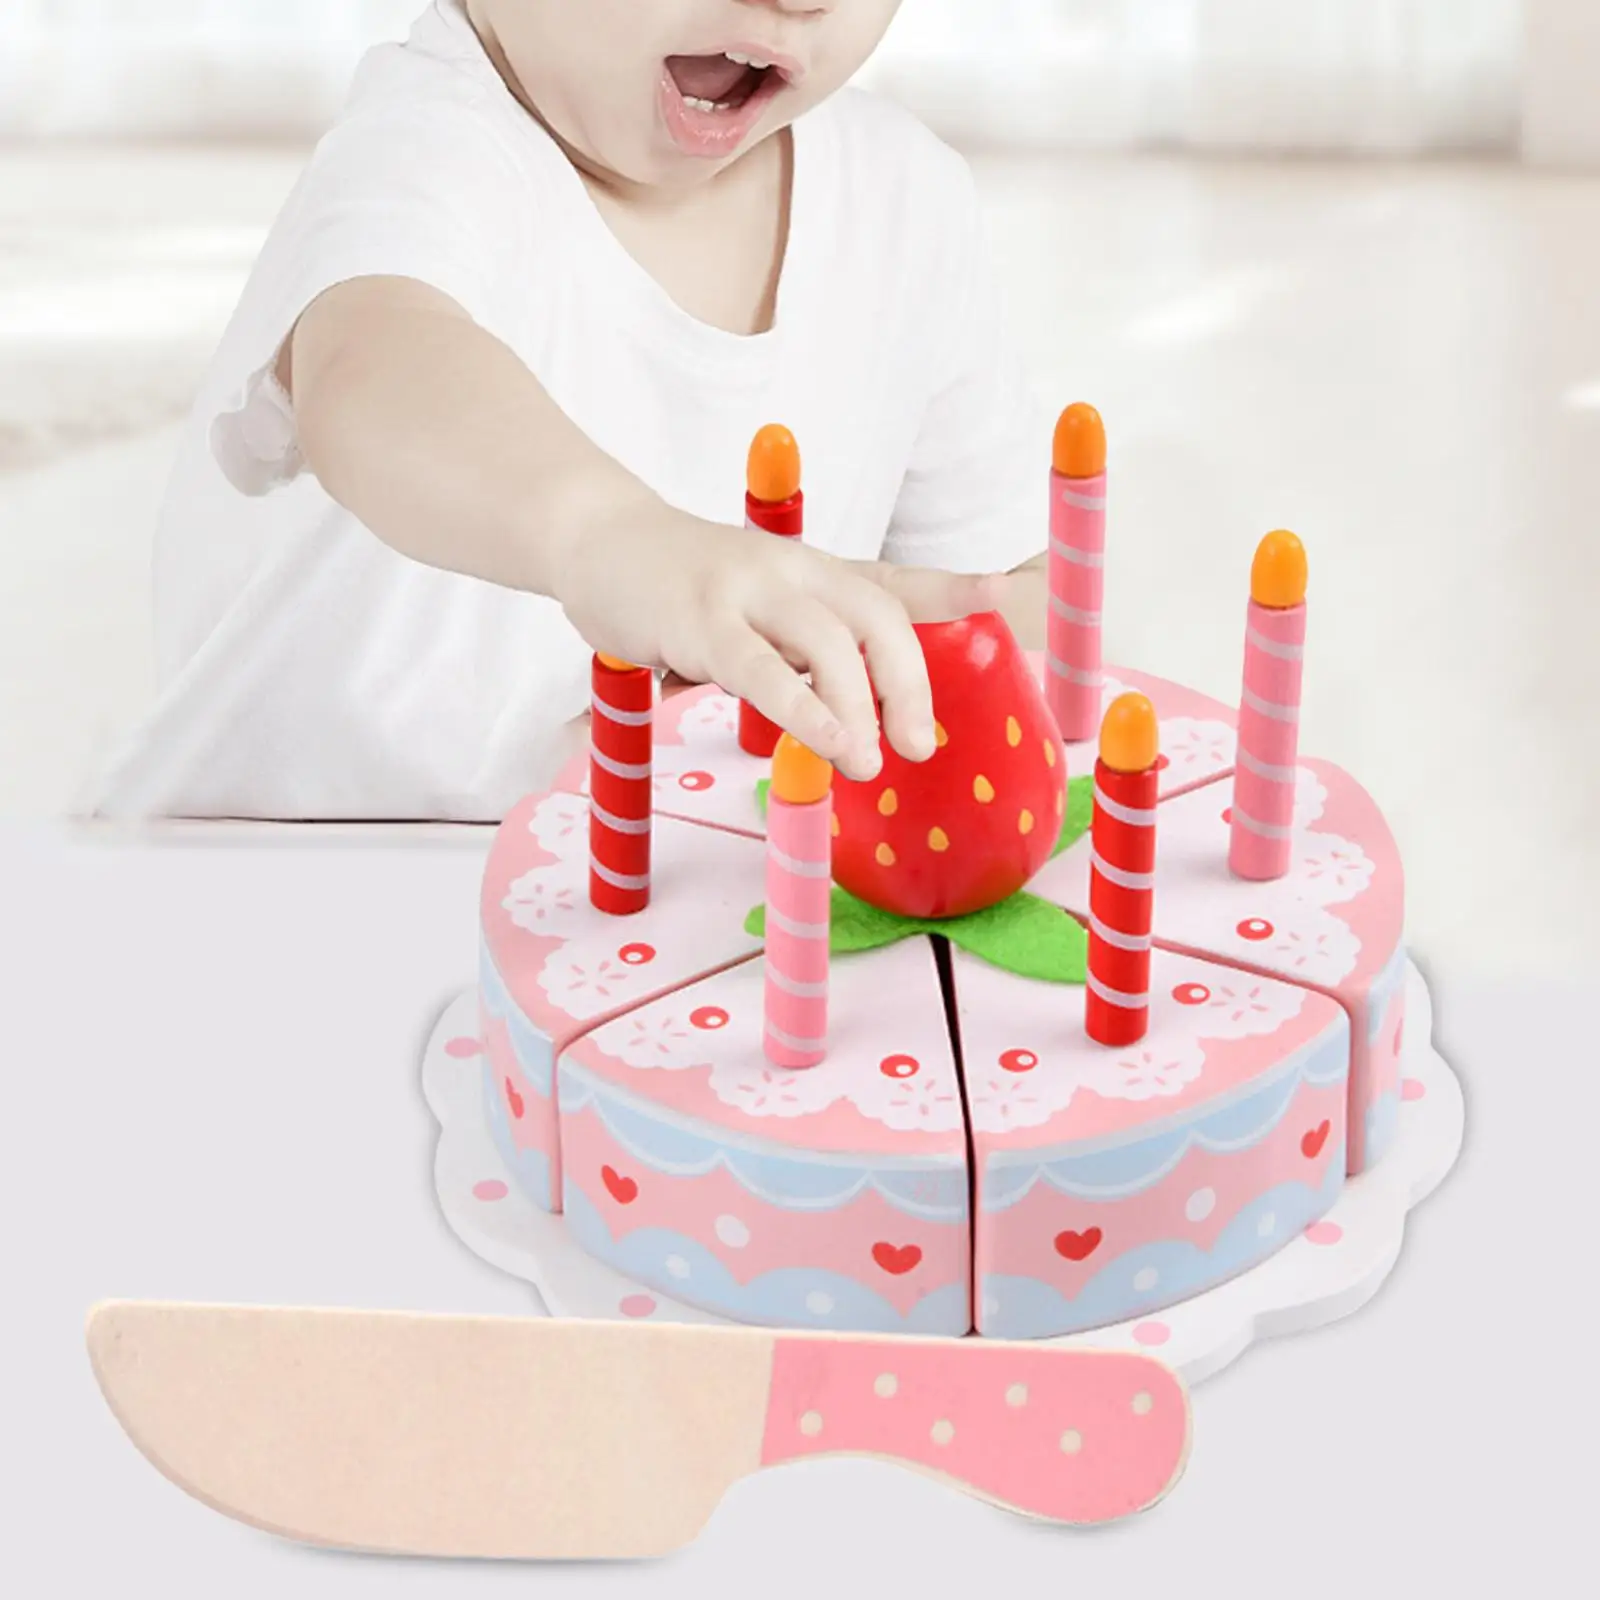 DIY Birthday Cake Toy Play Cake Toy Food Pretend Play for Children 3 4 5 6 Kids Toddler